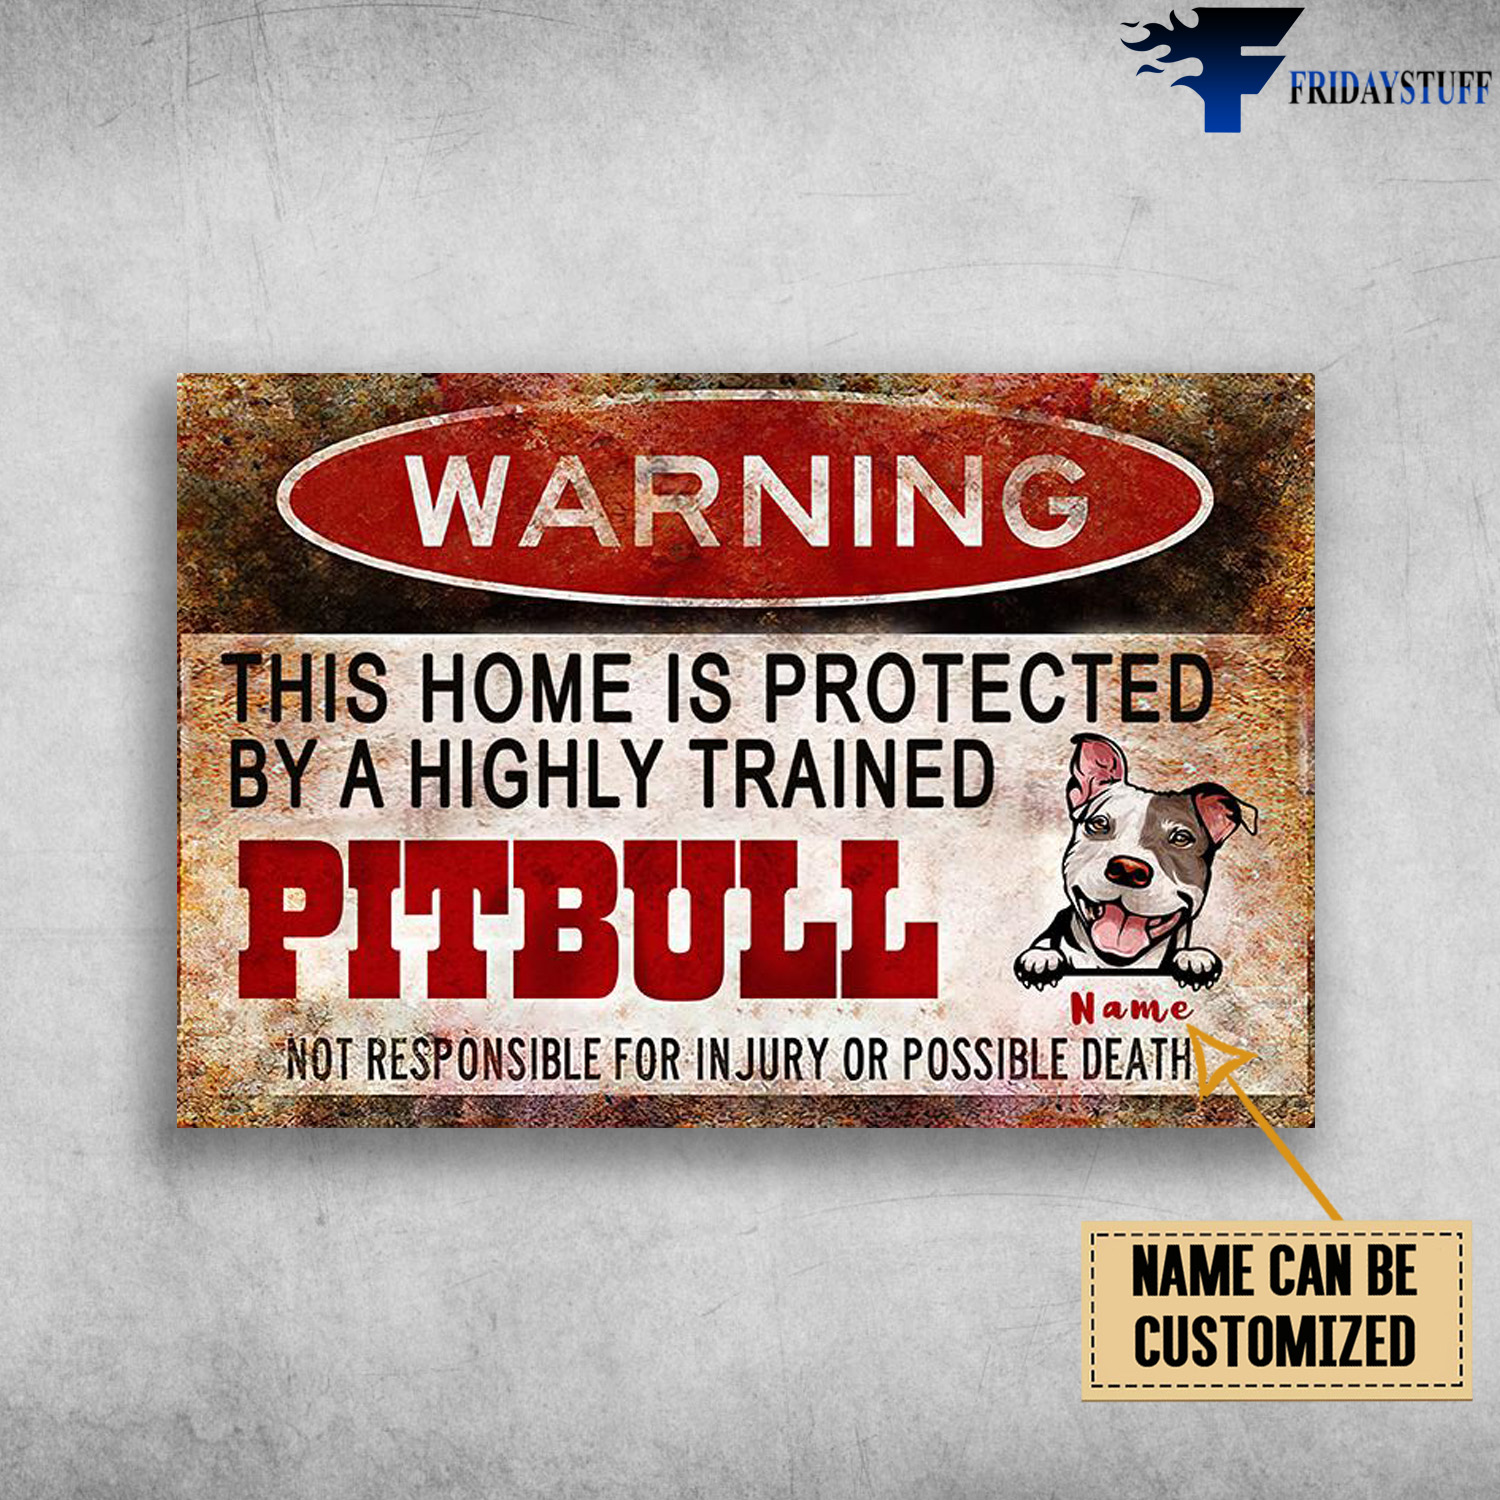 Pitbull Warning, This Home Is Protected, By A Highly Trained Pitbull, Not Responsible For In Jury, Or Possible Death